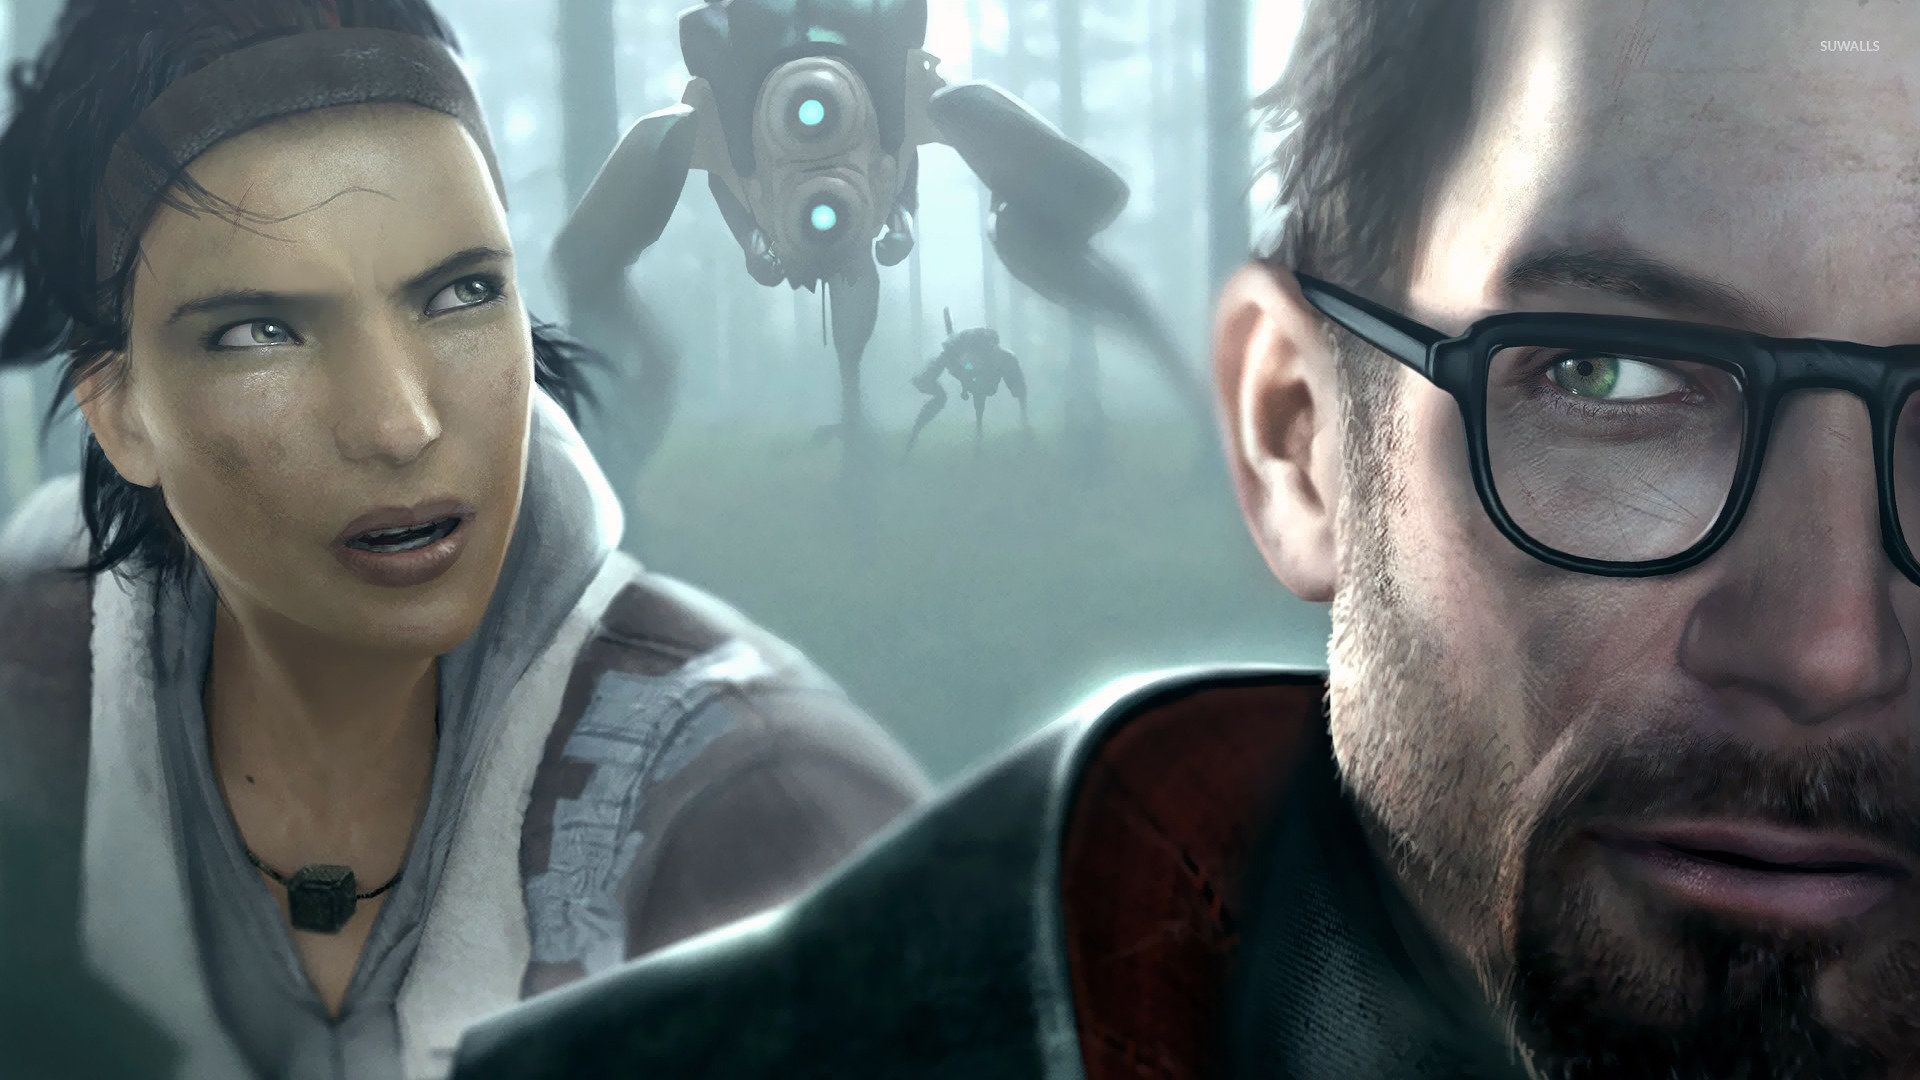 Clues point to Half-Life: Alyx being more than than just a prequel